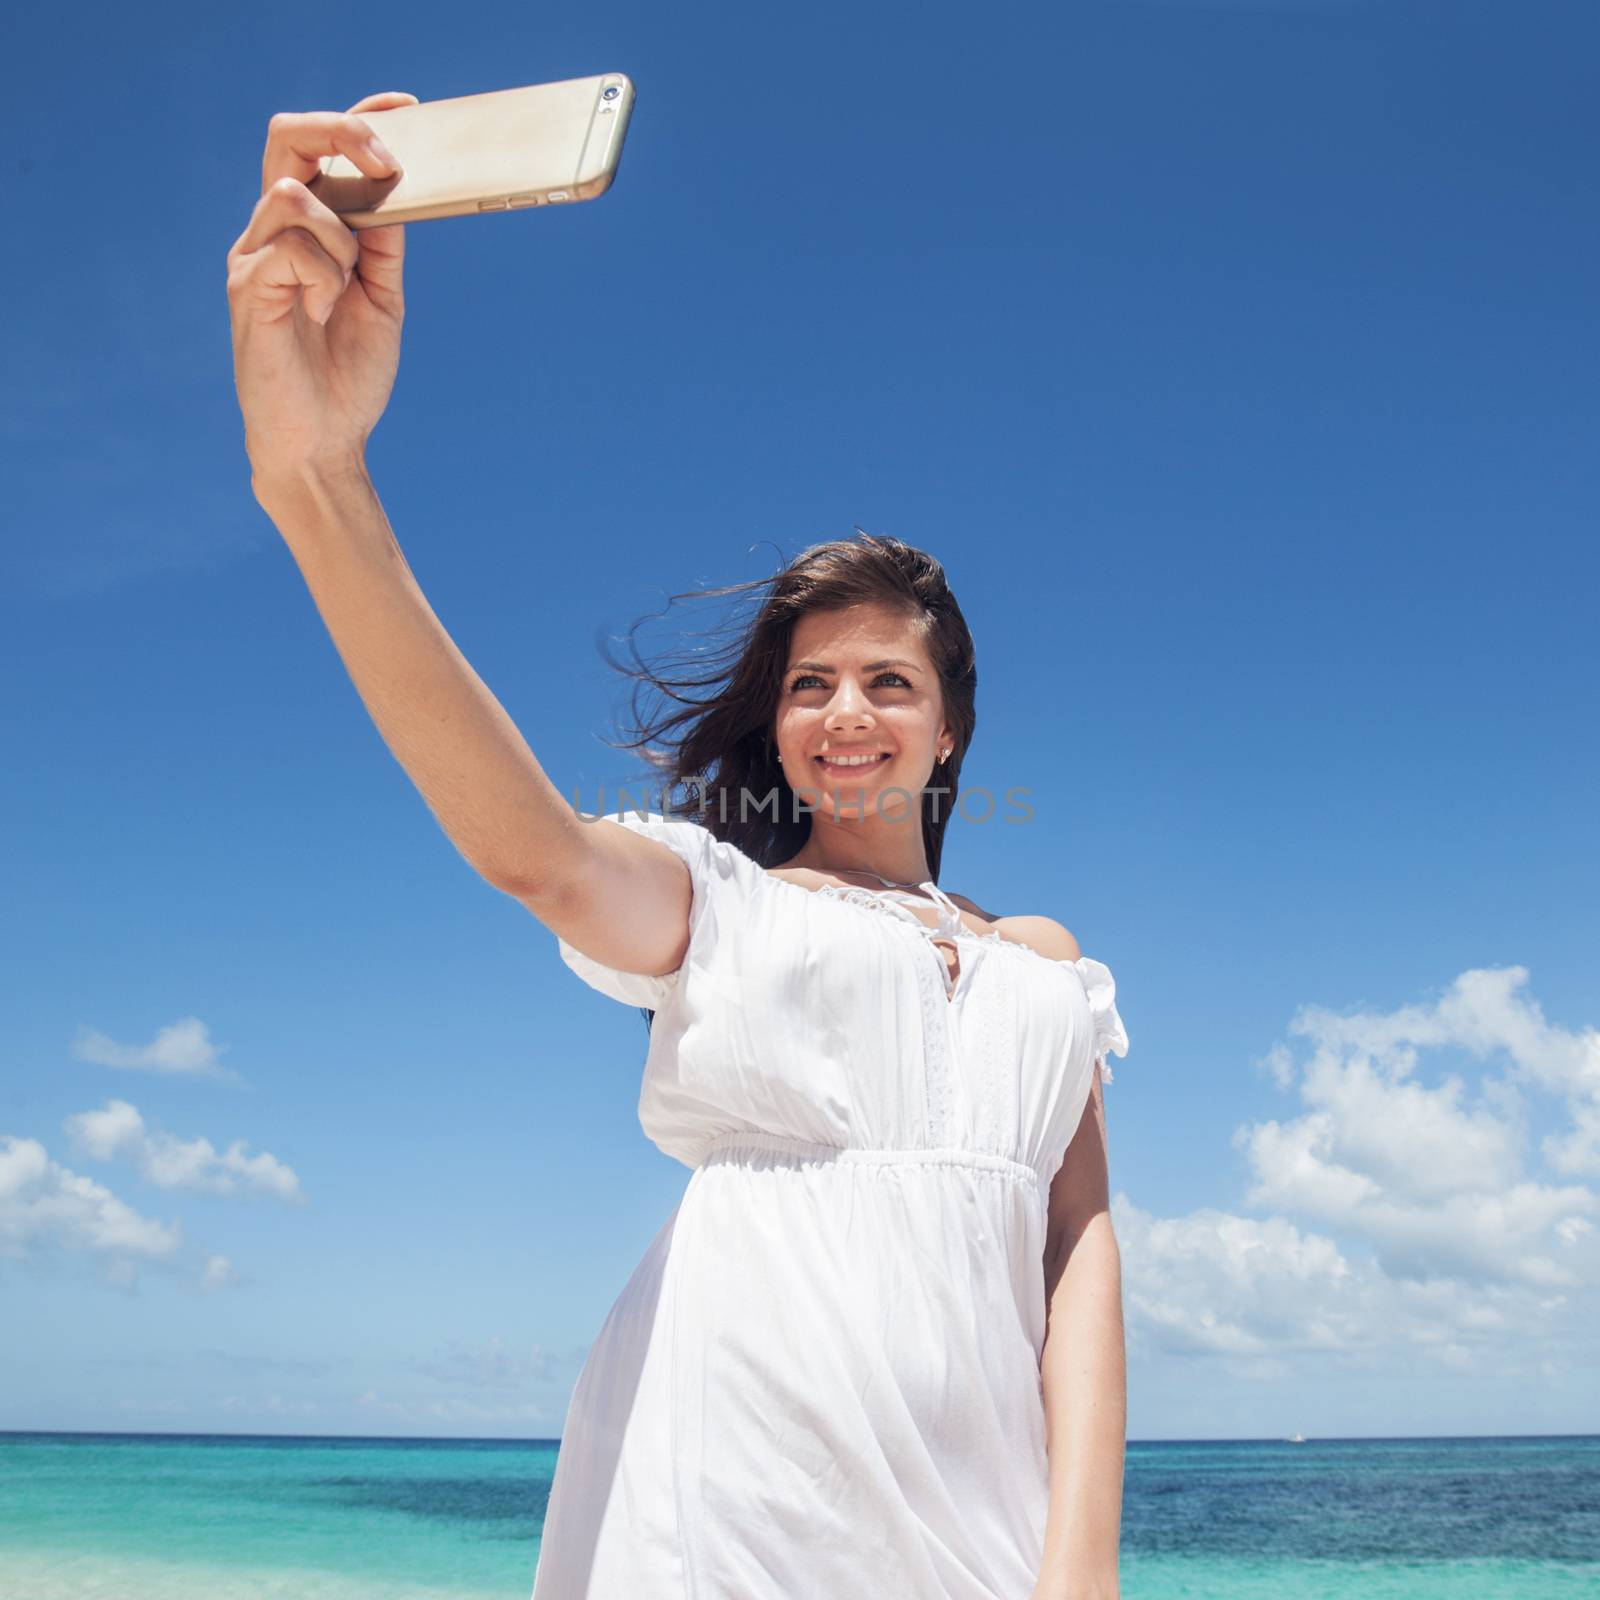 Smiling young woman taking selfie with smartphone on beach